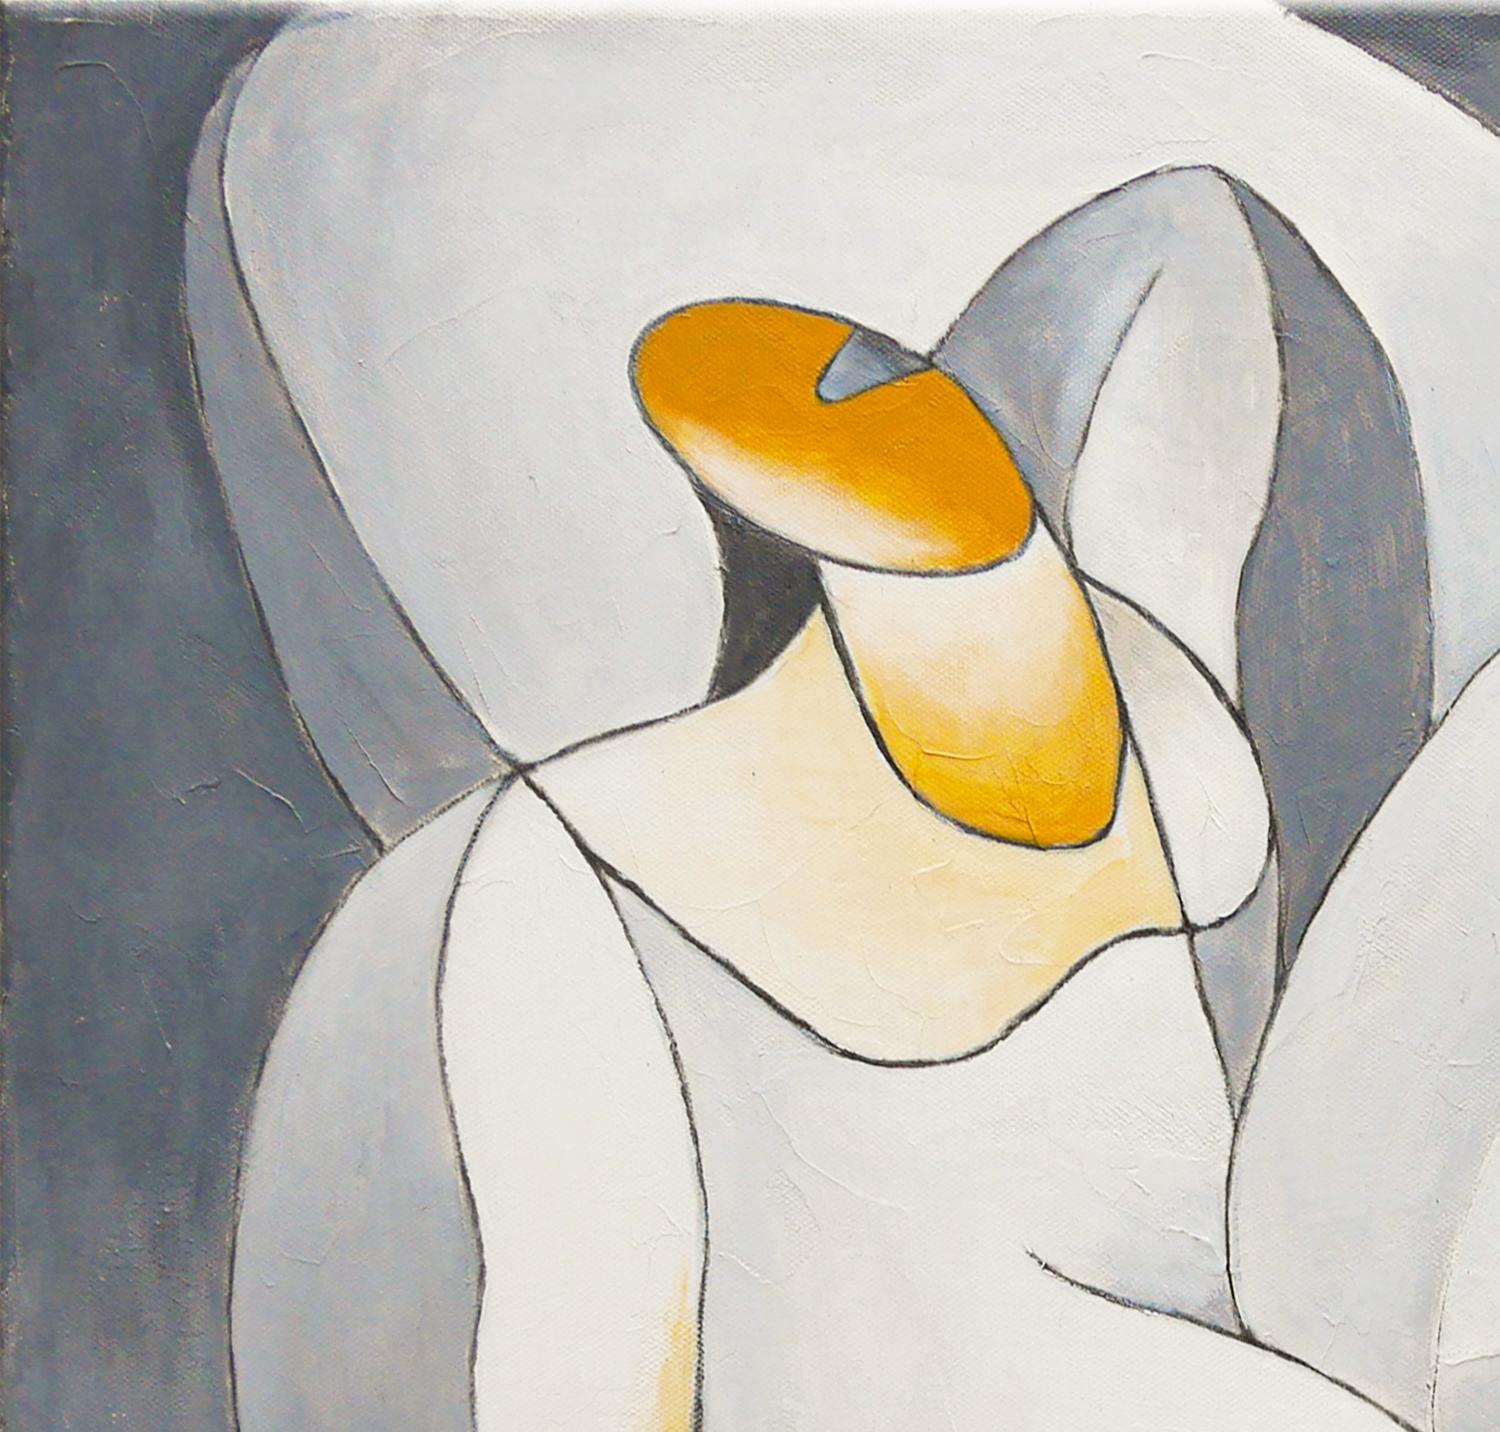 Gray-toned geometric abstract figurative painting by Houston, TX artist Scott Woodard. The painting depicts a nude figure with yellow accents against a gray background. Signed by the artist at the bottom right. Titled and dated at the back. Unframed